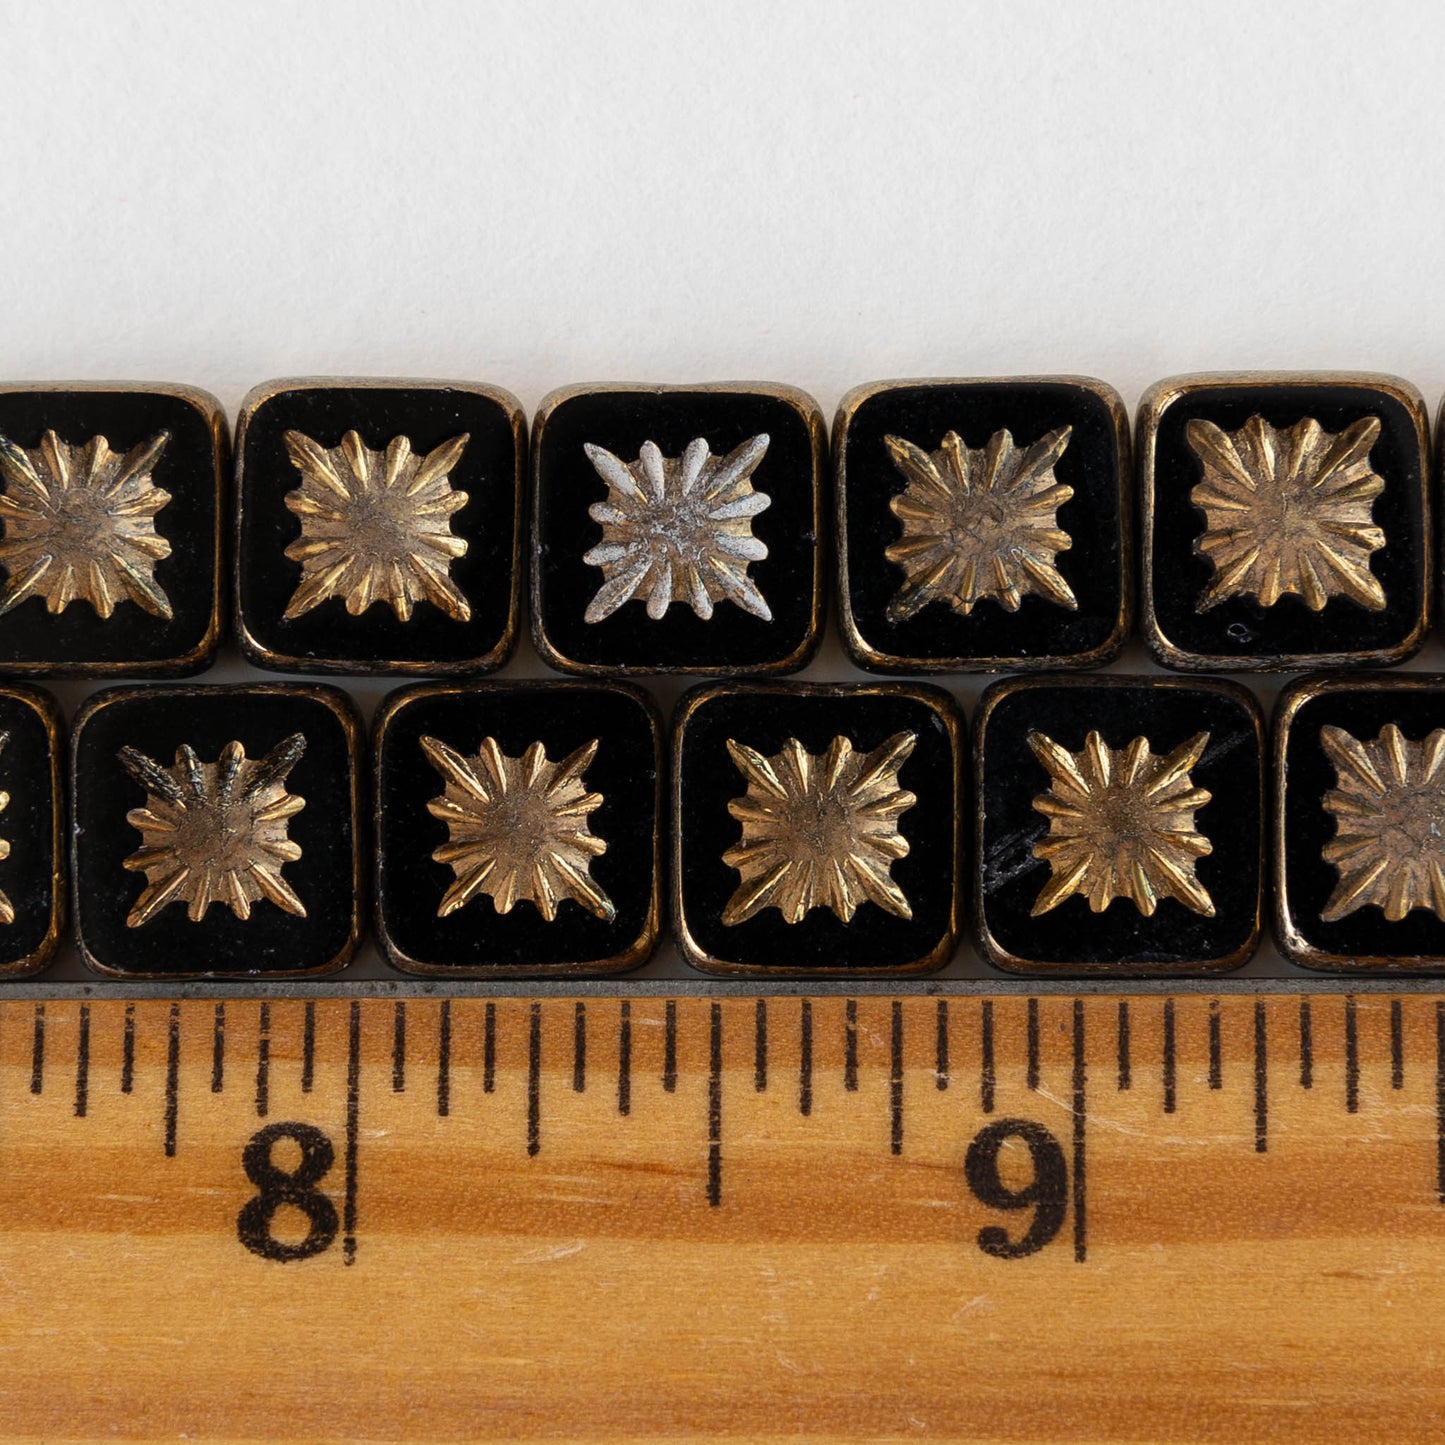 10mm Glass Tile Beads - Opaque Black with Gold Wash - 10 or 30